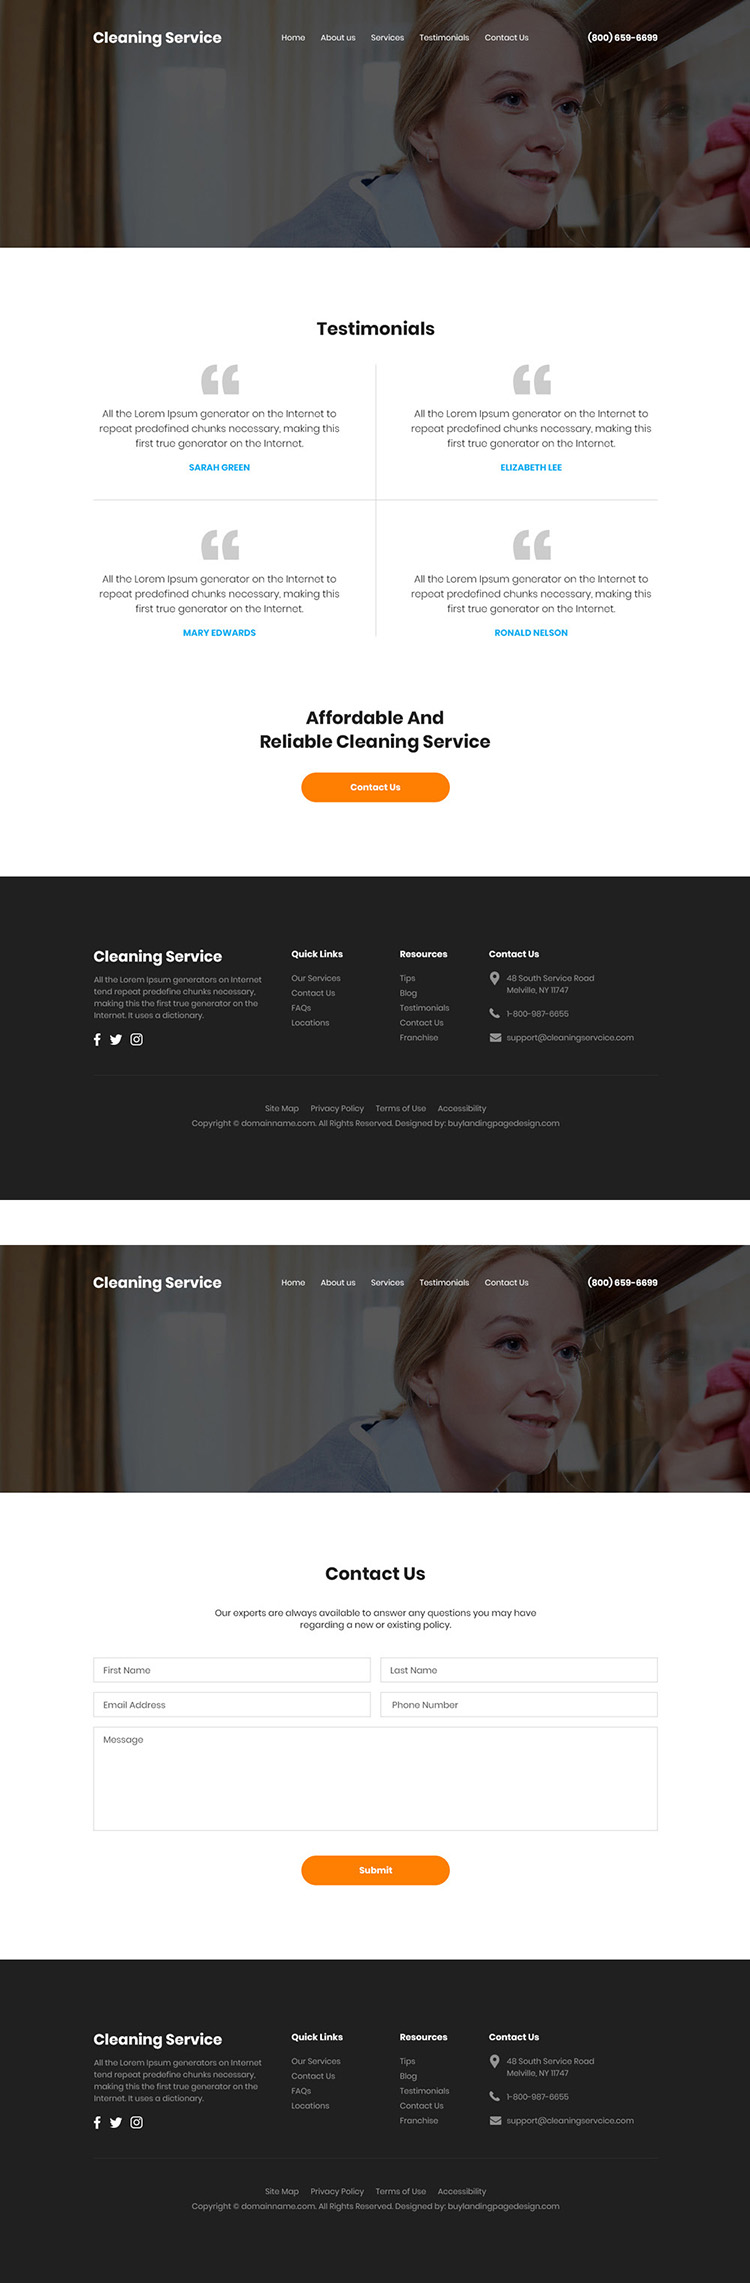 residential and commercial cleaning service company website design